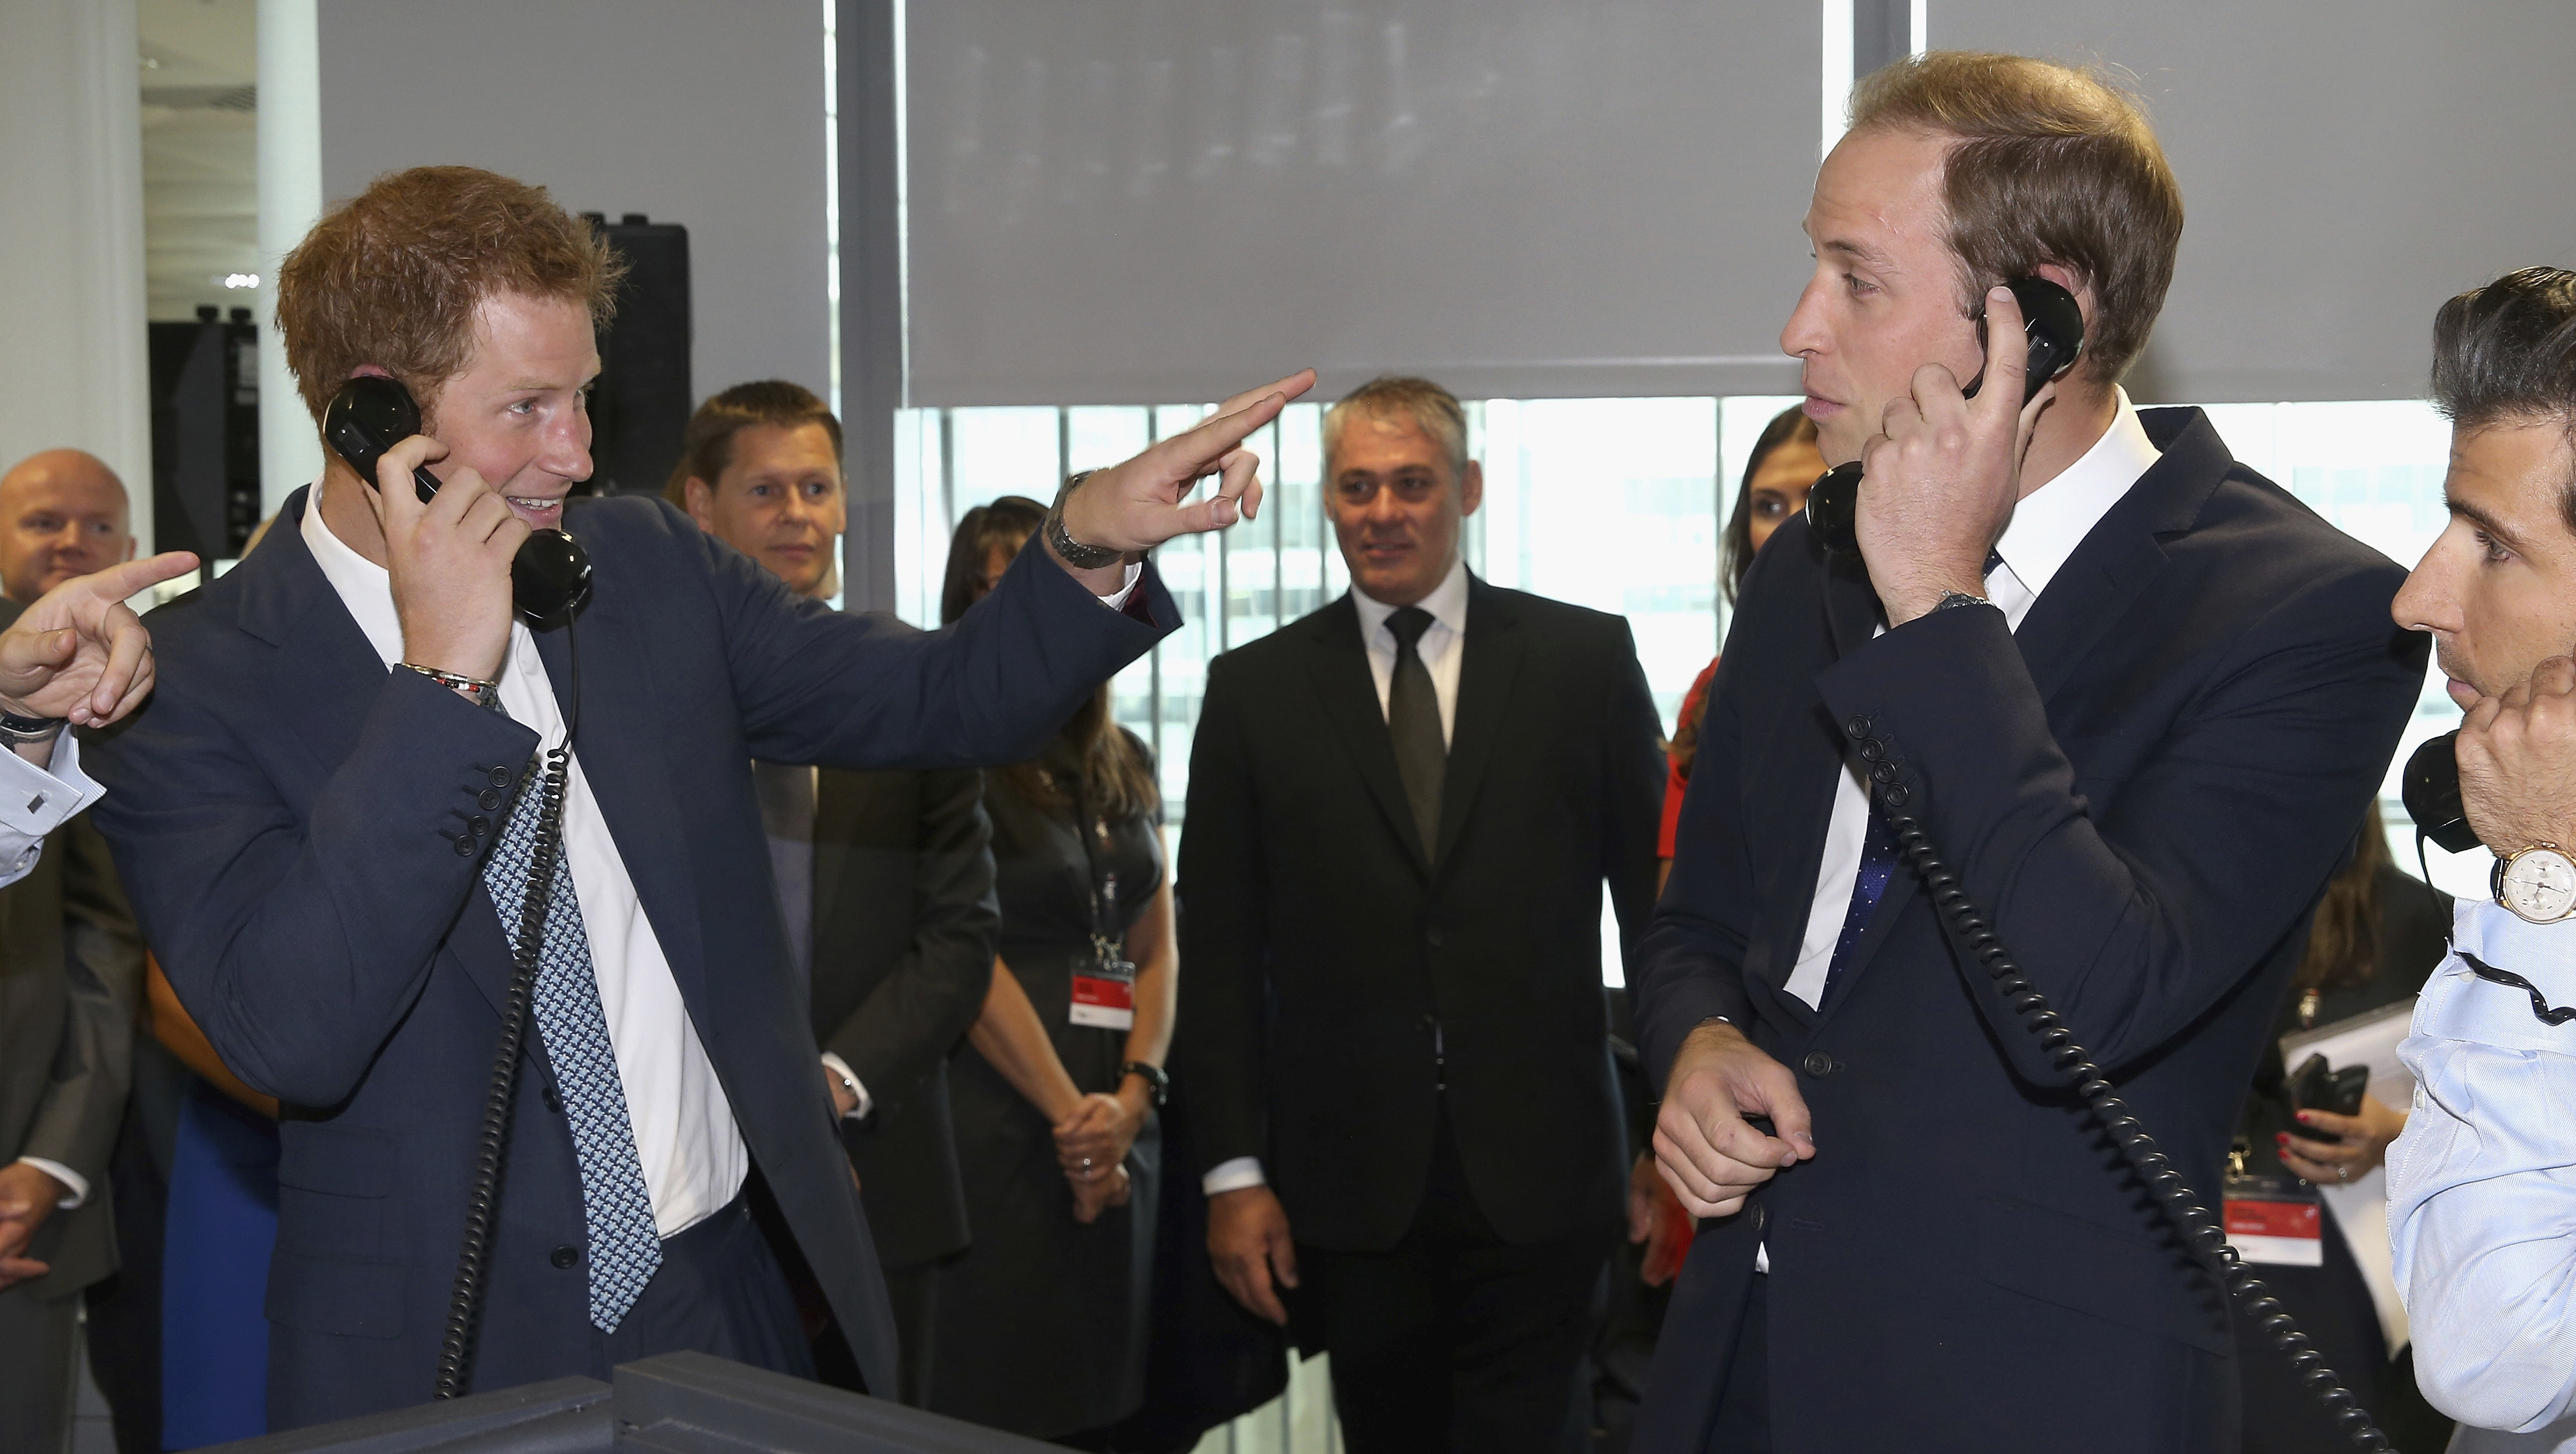 Prince William, Duke of Cambridge, right and his brother Prince Harry take part in a trade on the BGC Partners trading floor, during the BGC Charity Day 2013, in Canary Wharf, London, Wednesday, Sept. 11, 2013.